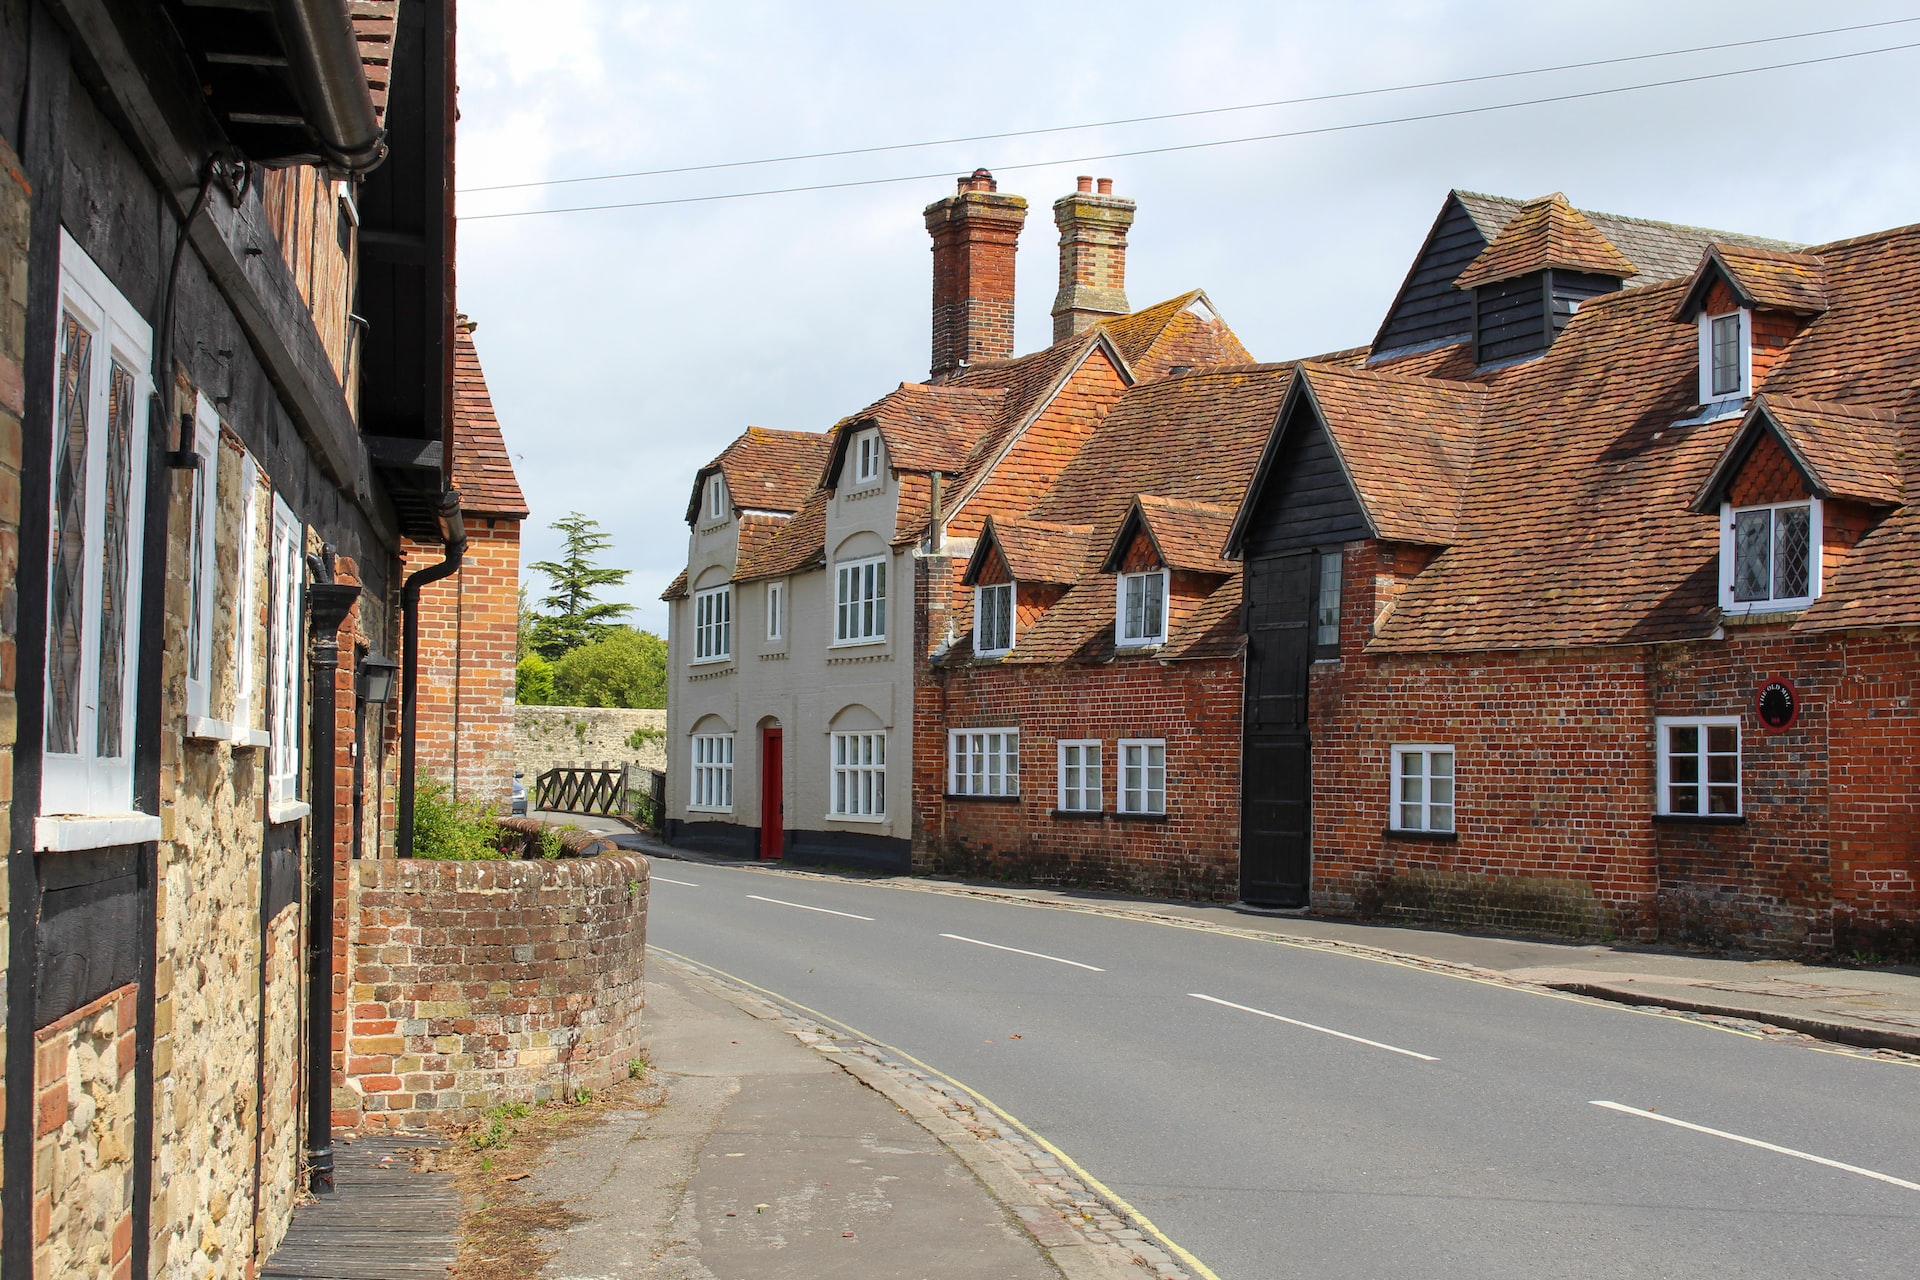 A road of British houses